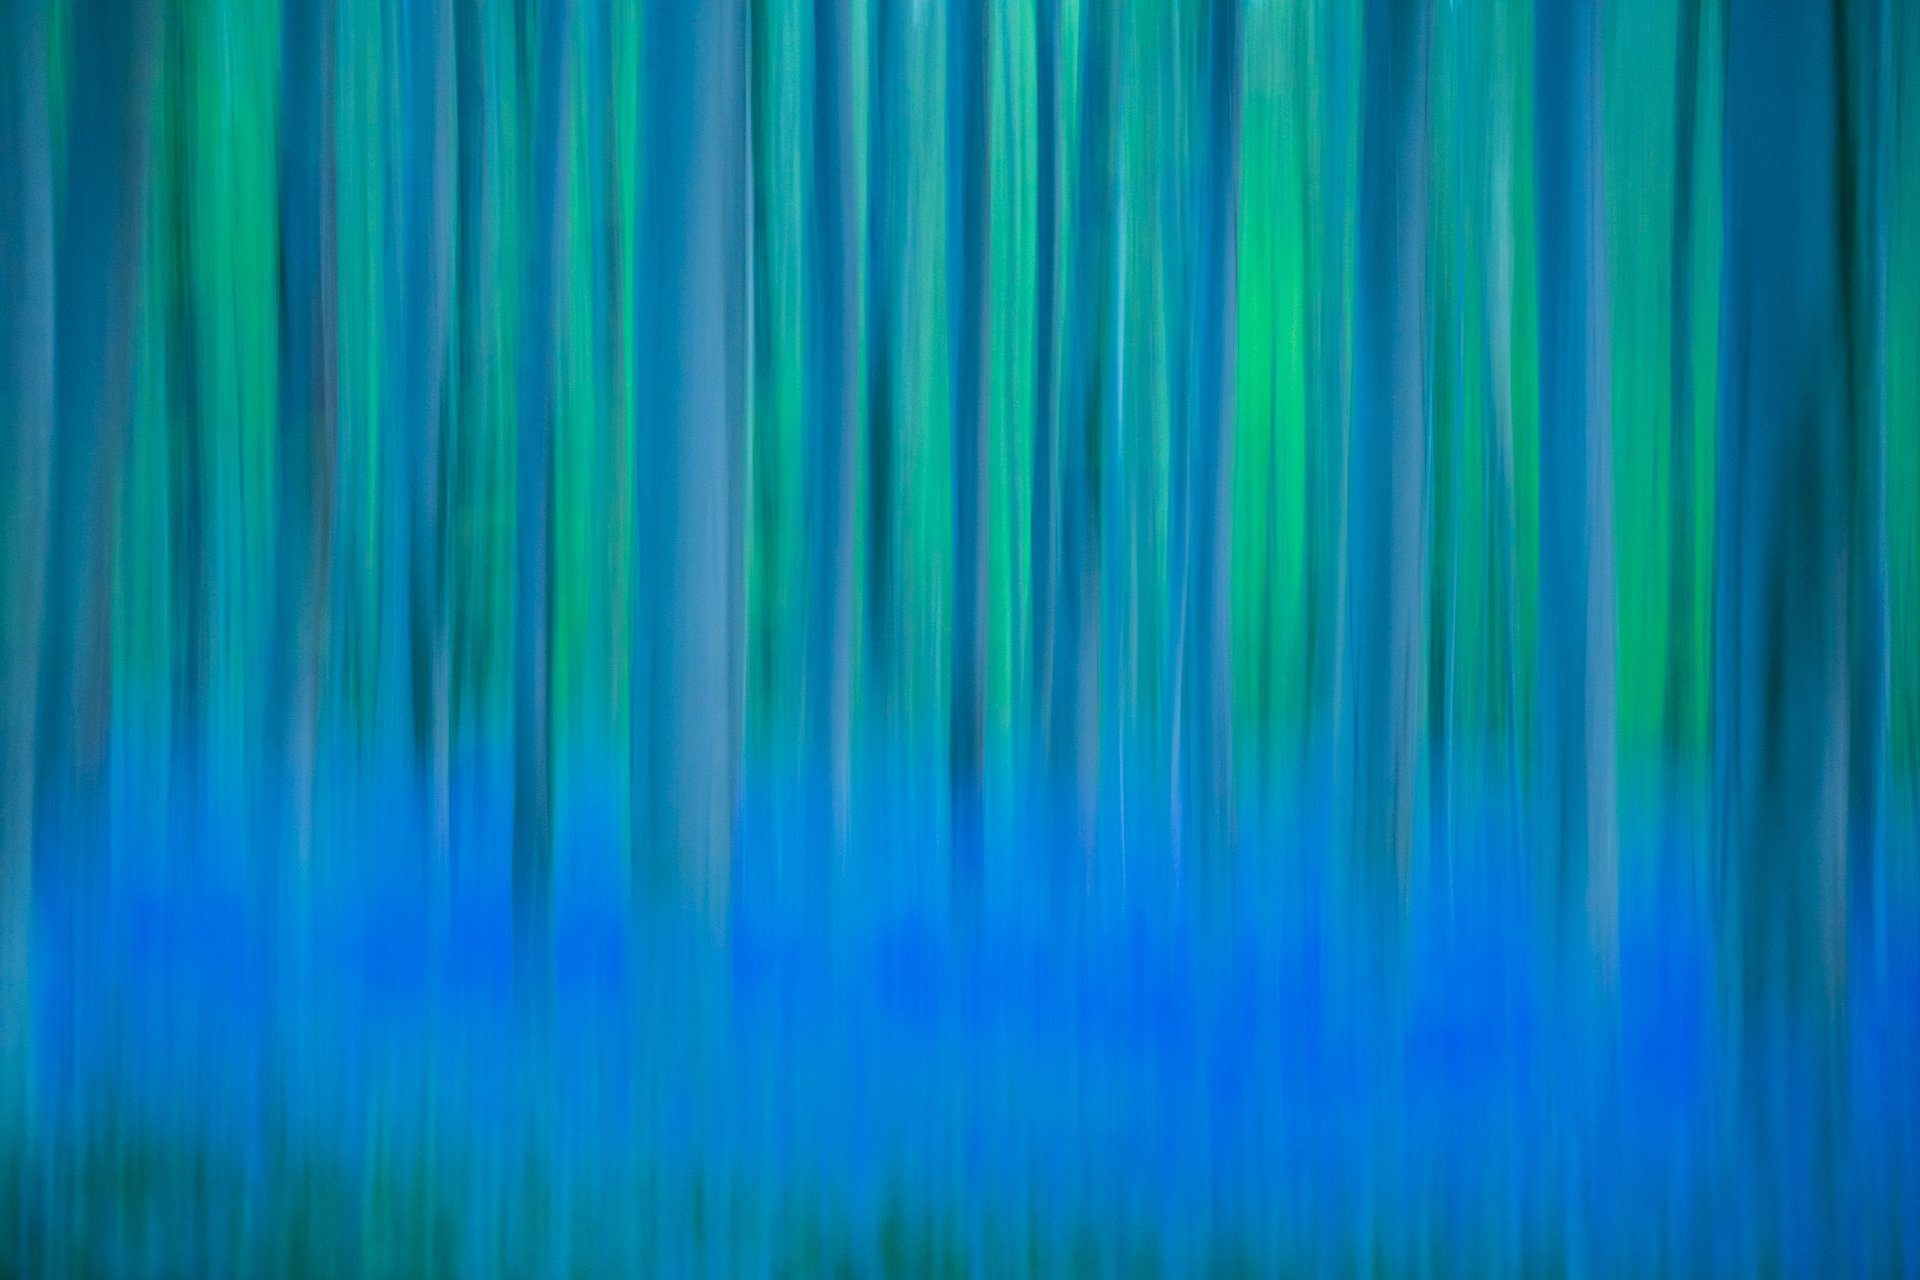 aweb-blue and green-landscape in motion.jpg